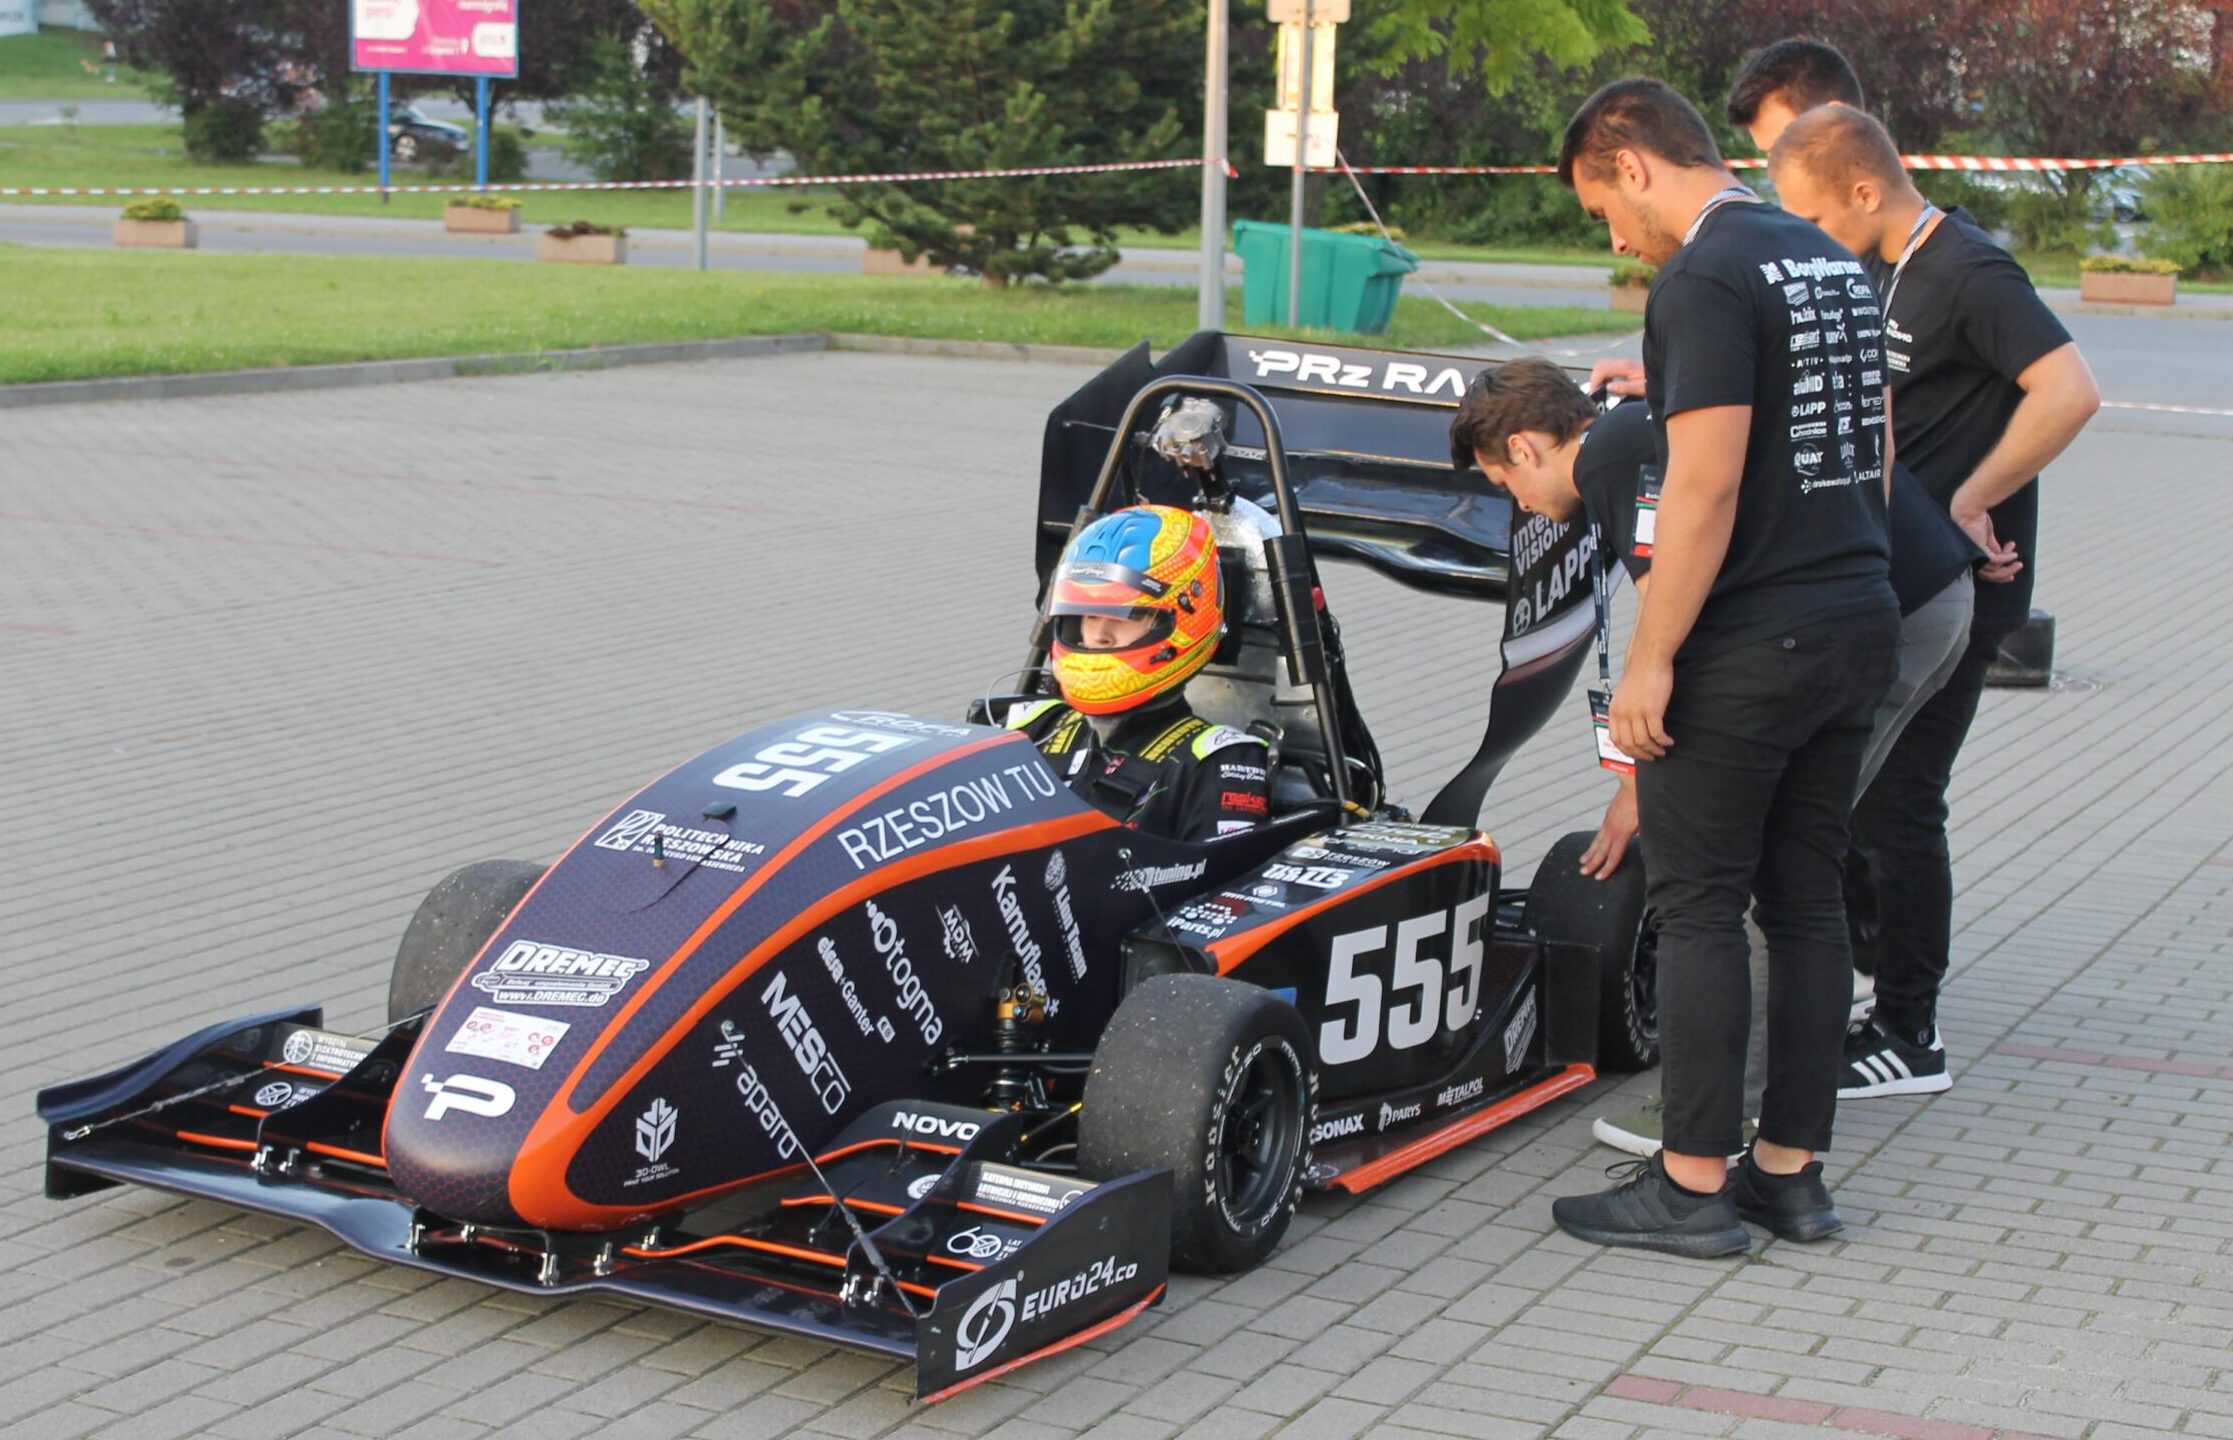 Team of the Rzészow University of Technology (Poland), reviewing their hybrid vehicle.